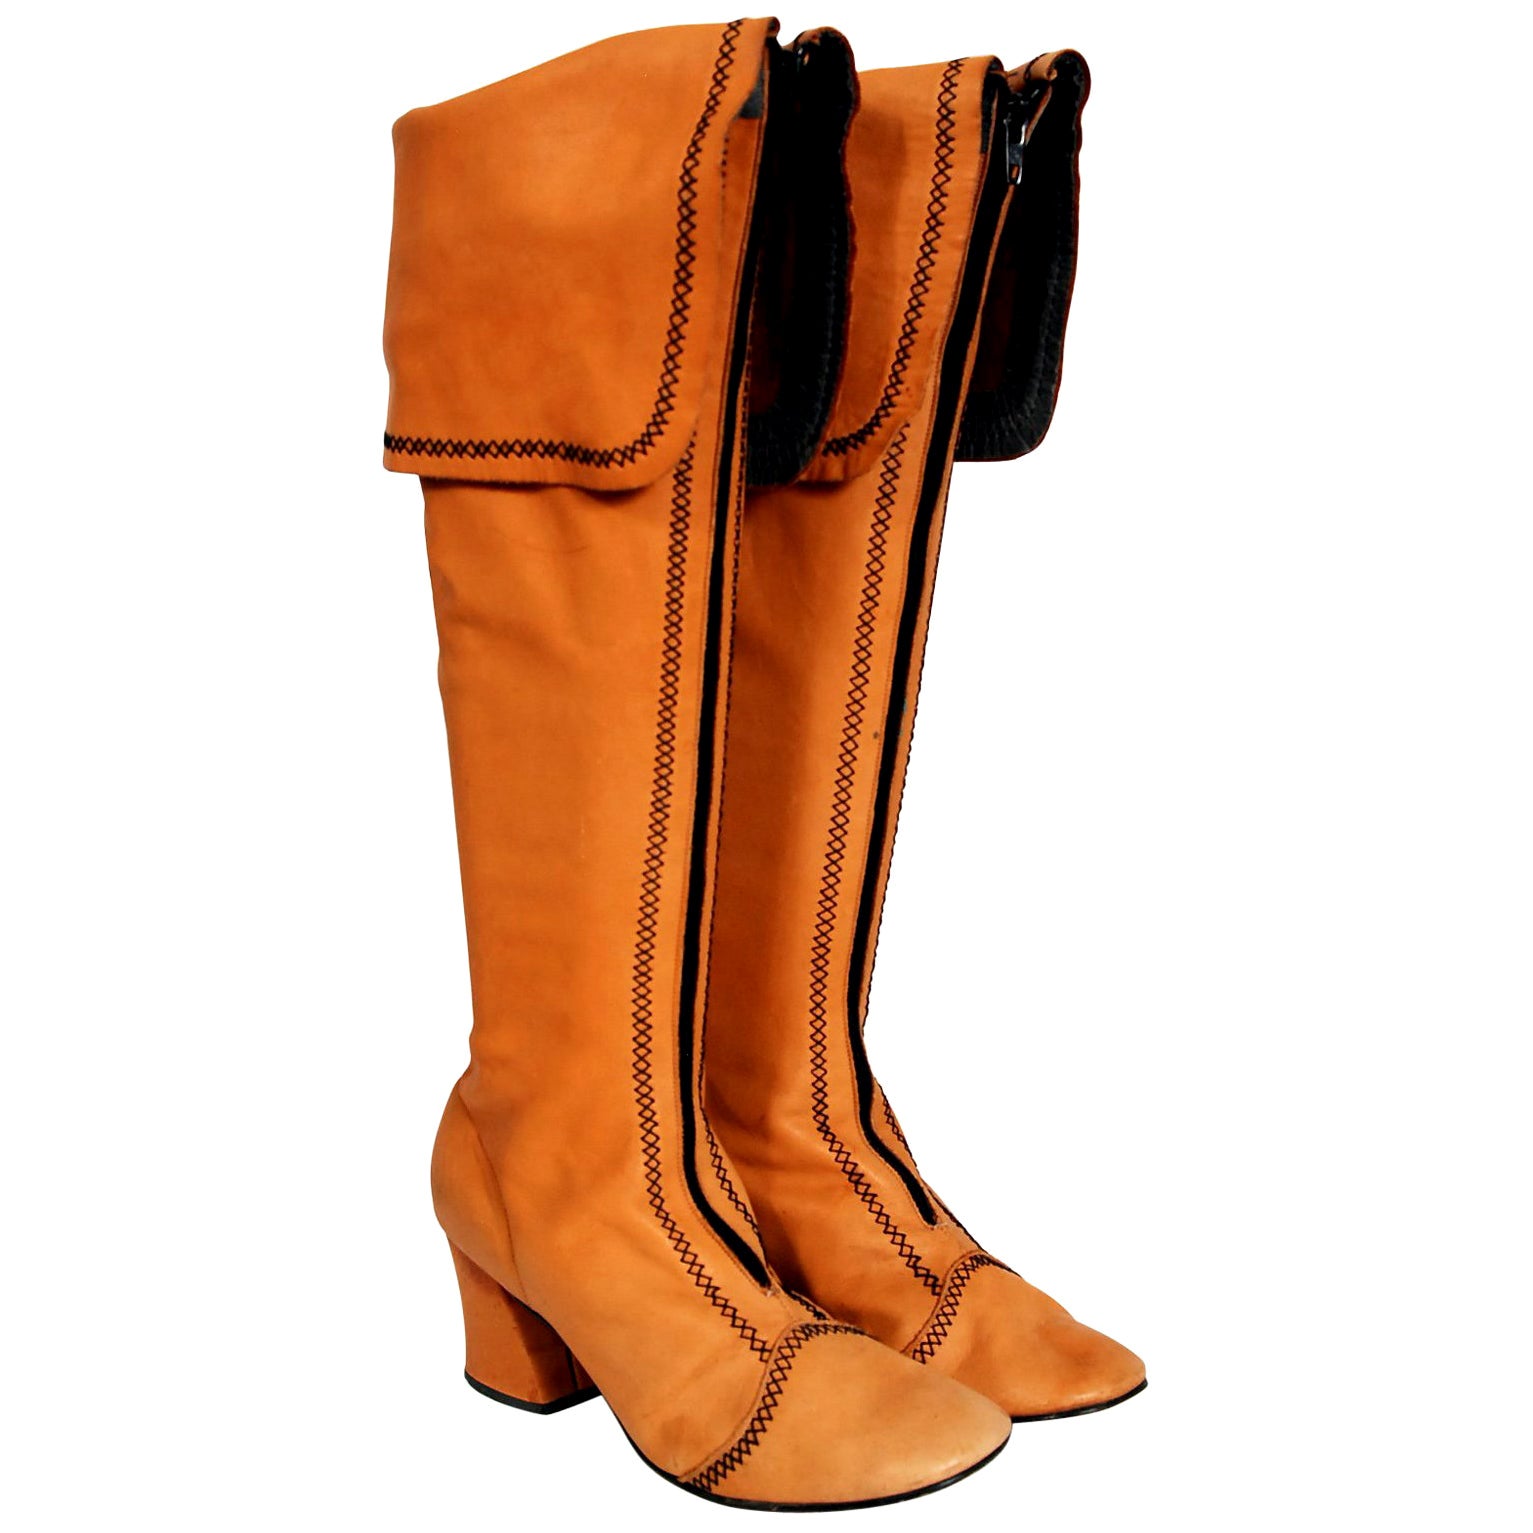 Vintage 1970's Tan Brown Leather Wide-Cuff Knee High Bohemian Pirate Boots  